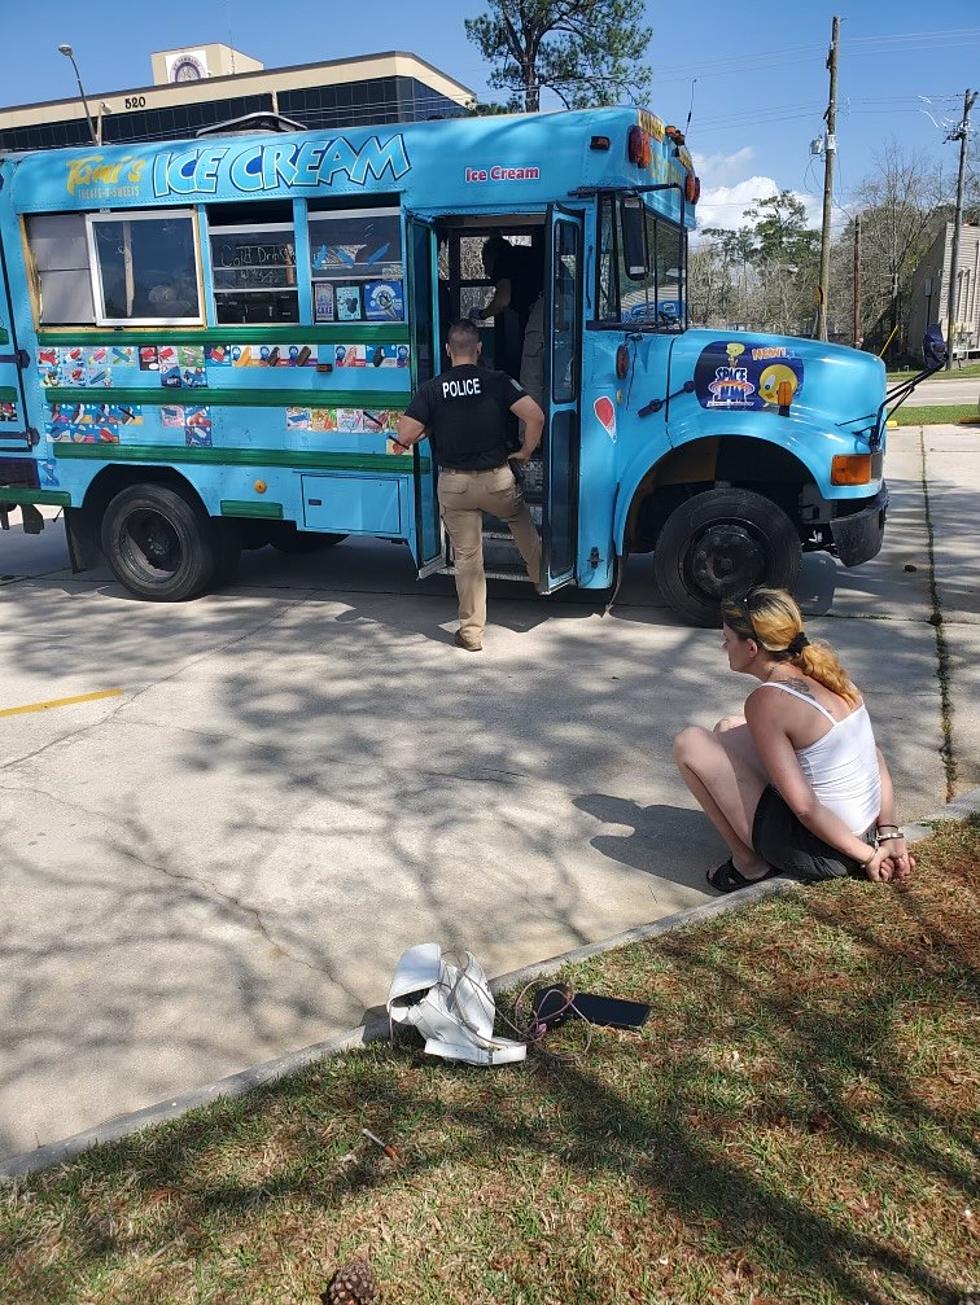 Louisiana Woman Caught Selling Meth Out of Ice Cream Truck